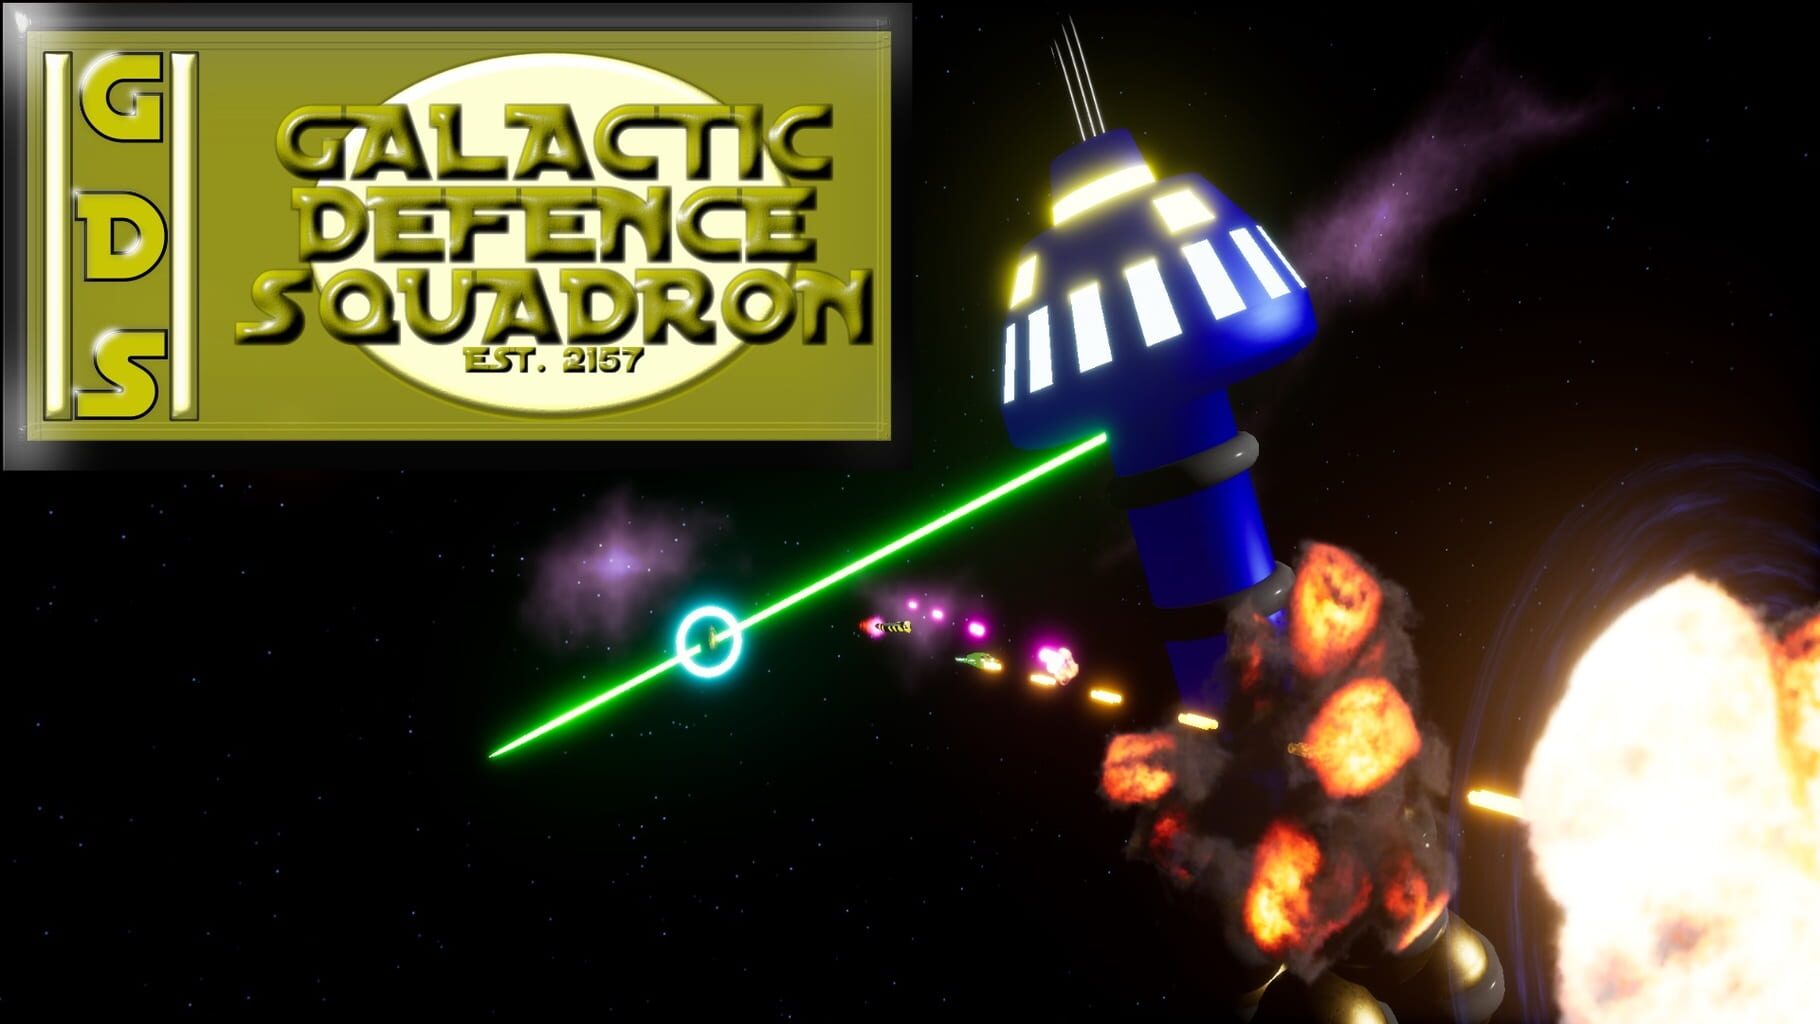 Galactic Defence Squadron artwork